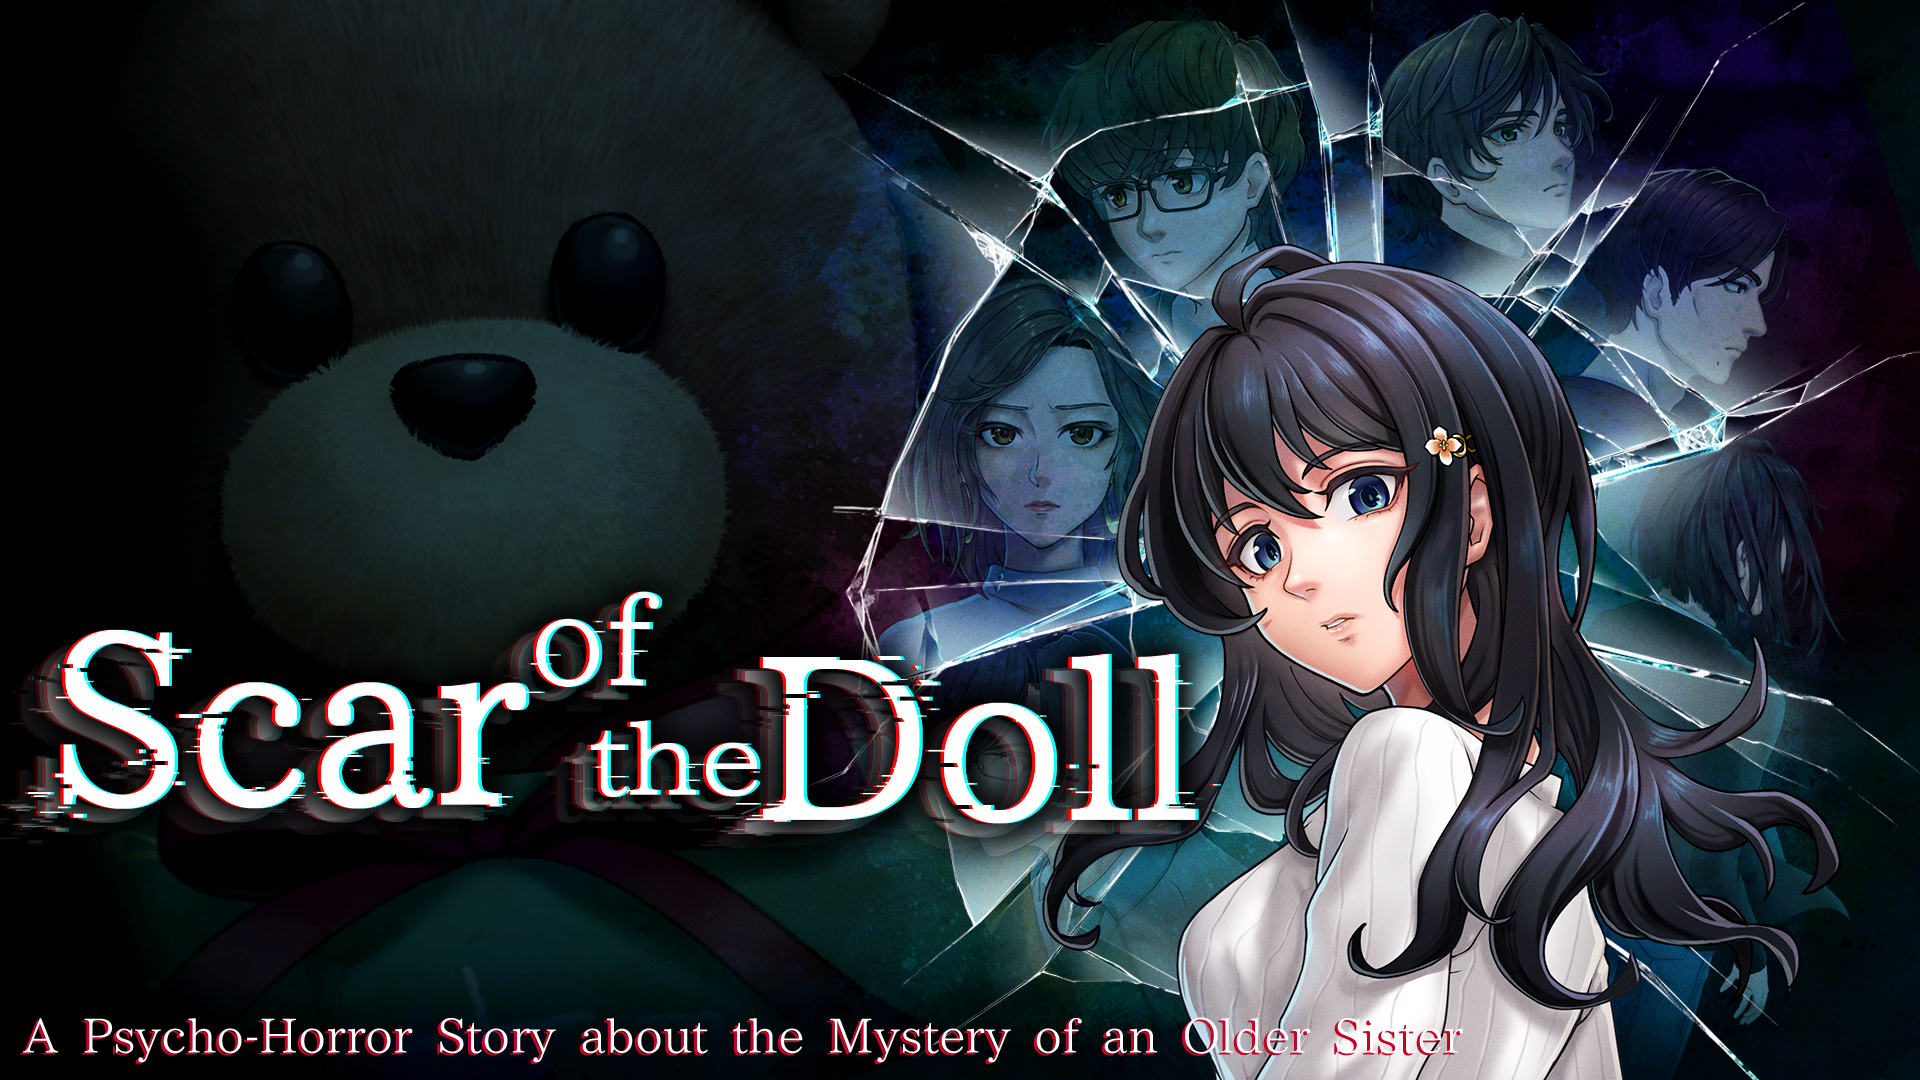 “Scar of the Doll,” the pioneering Japanese indie visual novel for the Steam